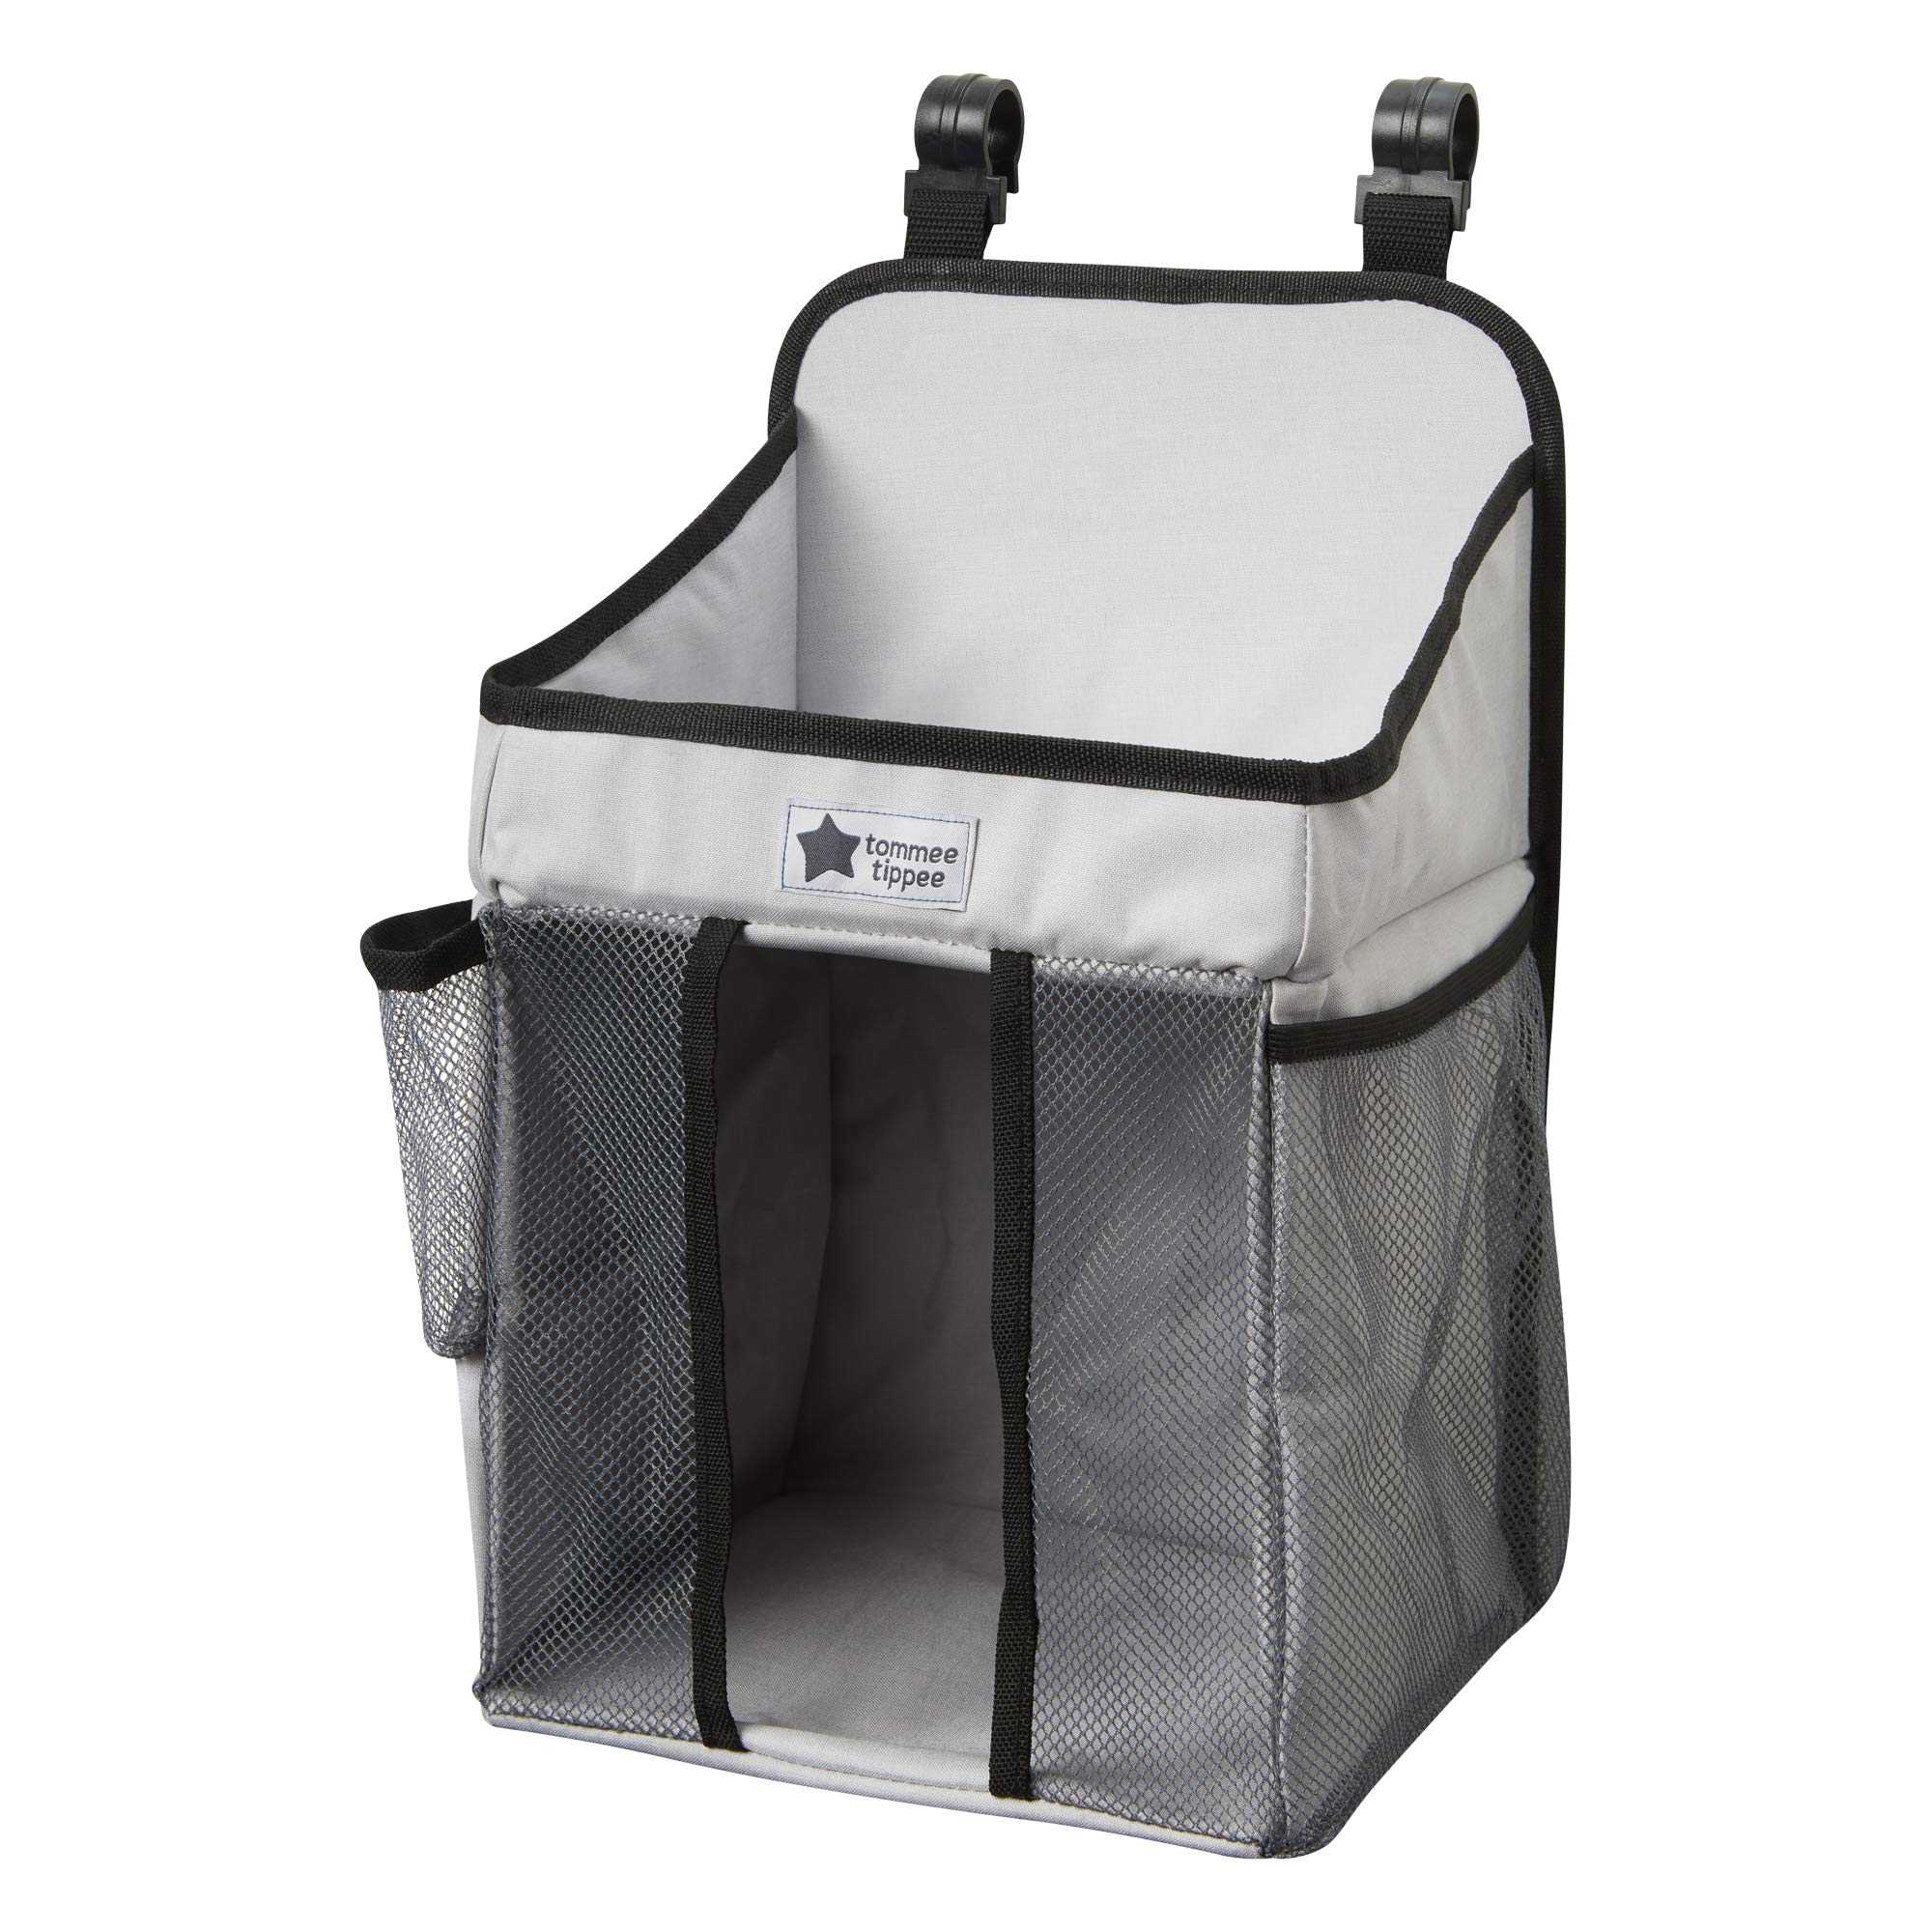 Tommee Tippee Nappy Organiser Diaper Caddy, Grey & Black